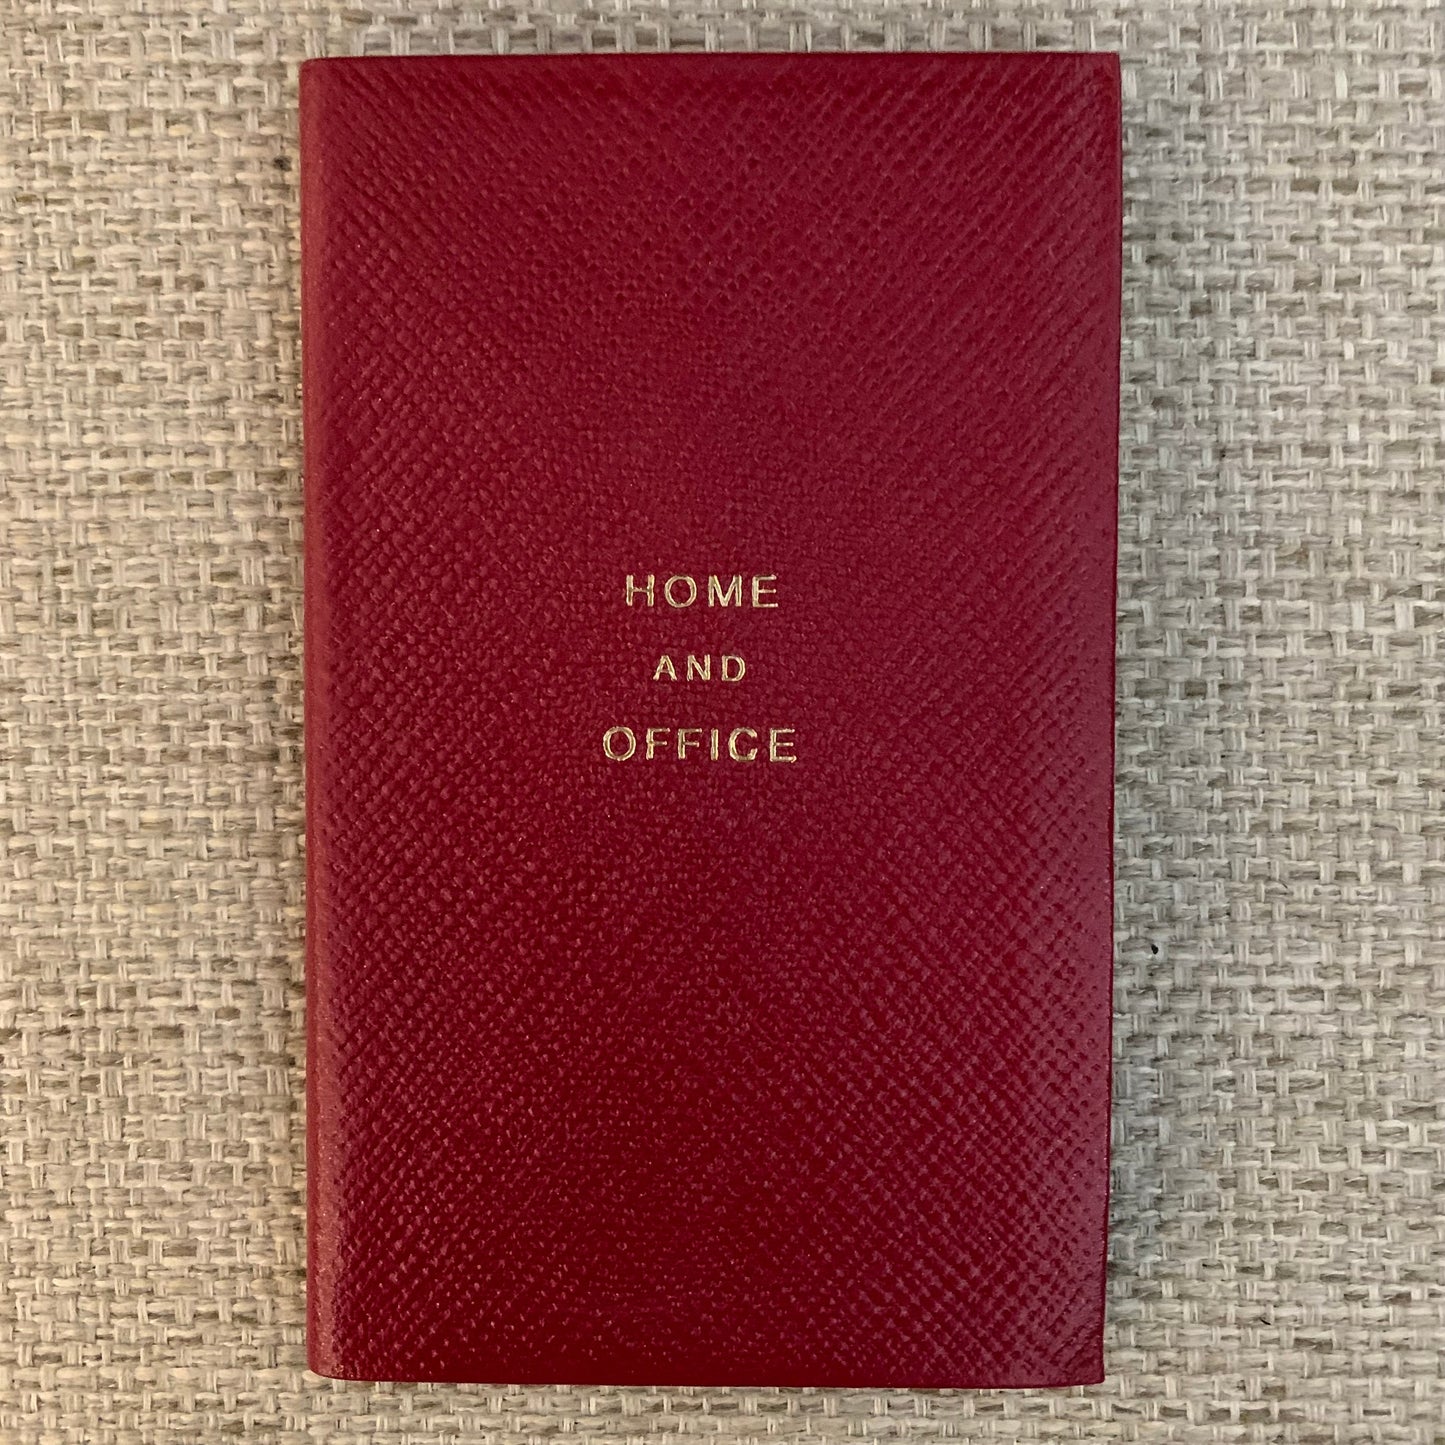 Address Book | Home and Office | Pocket Address Book | 5 by 3 inches | Cross Grain Leather | A53LHO